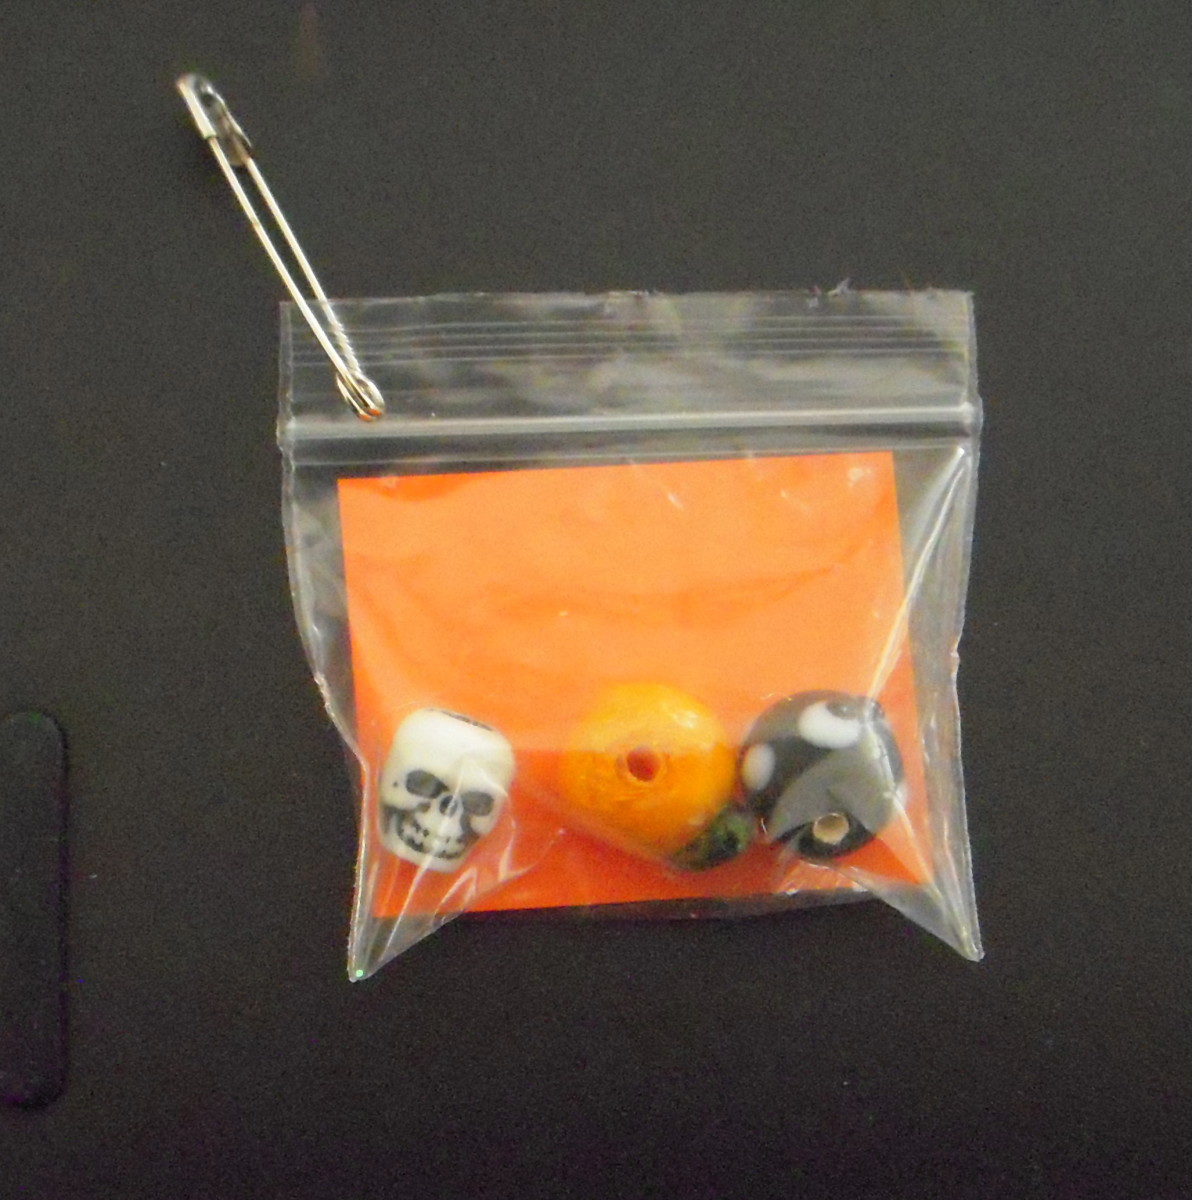 This is an easy SWAP that uses bulk halloween themed beads: a skull, a pumpkin and a black cat. The orange card reads "Halloween in a Bag" and has the girl's name and troop number on back.